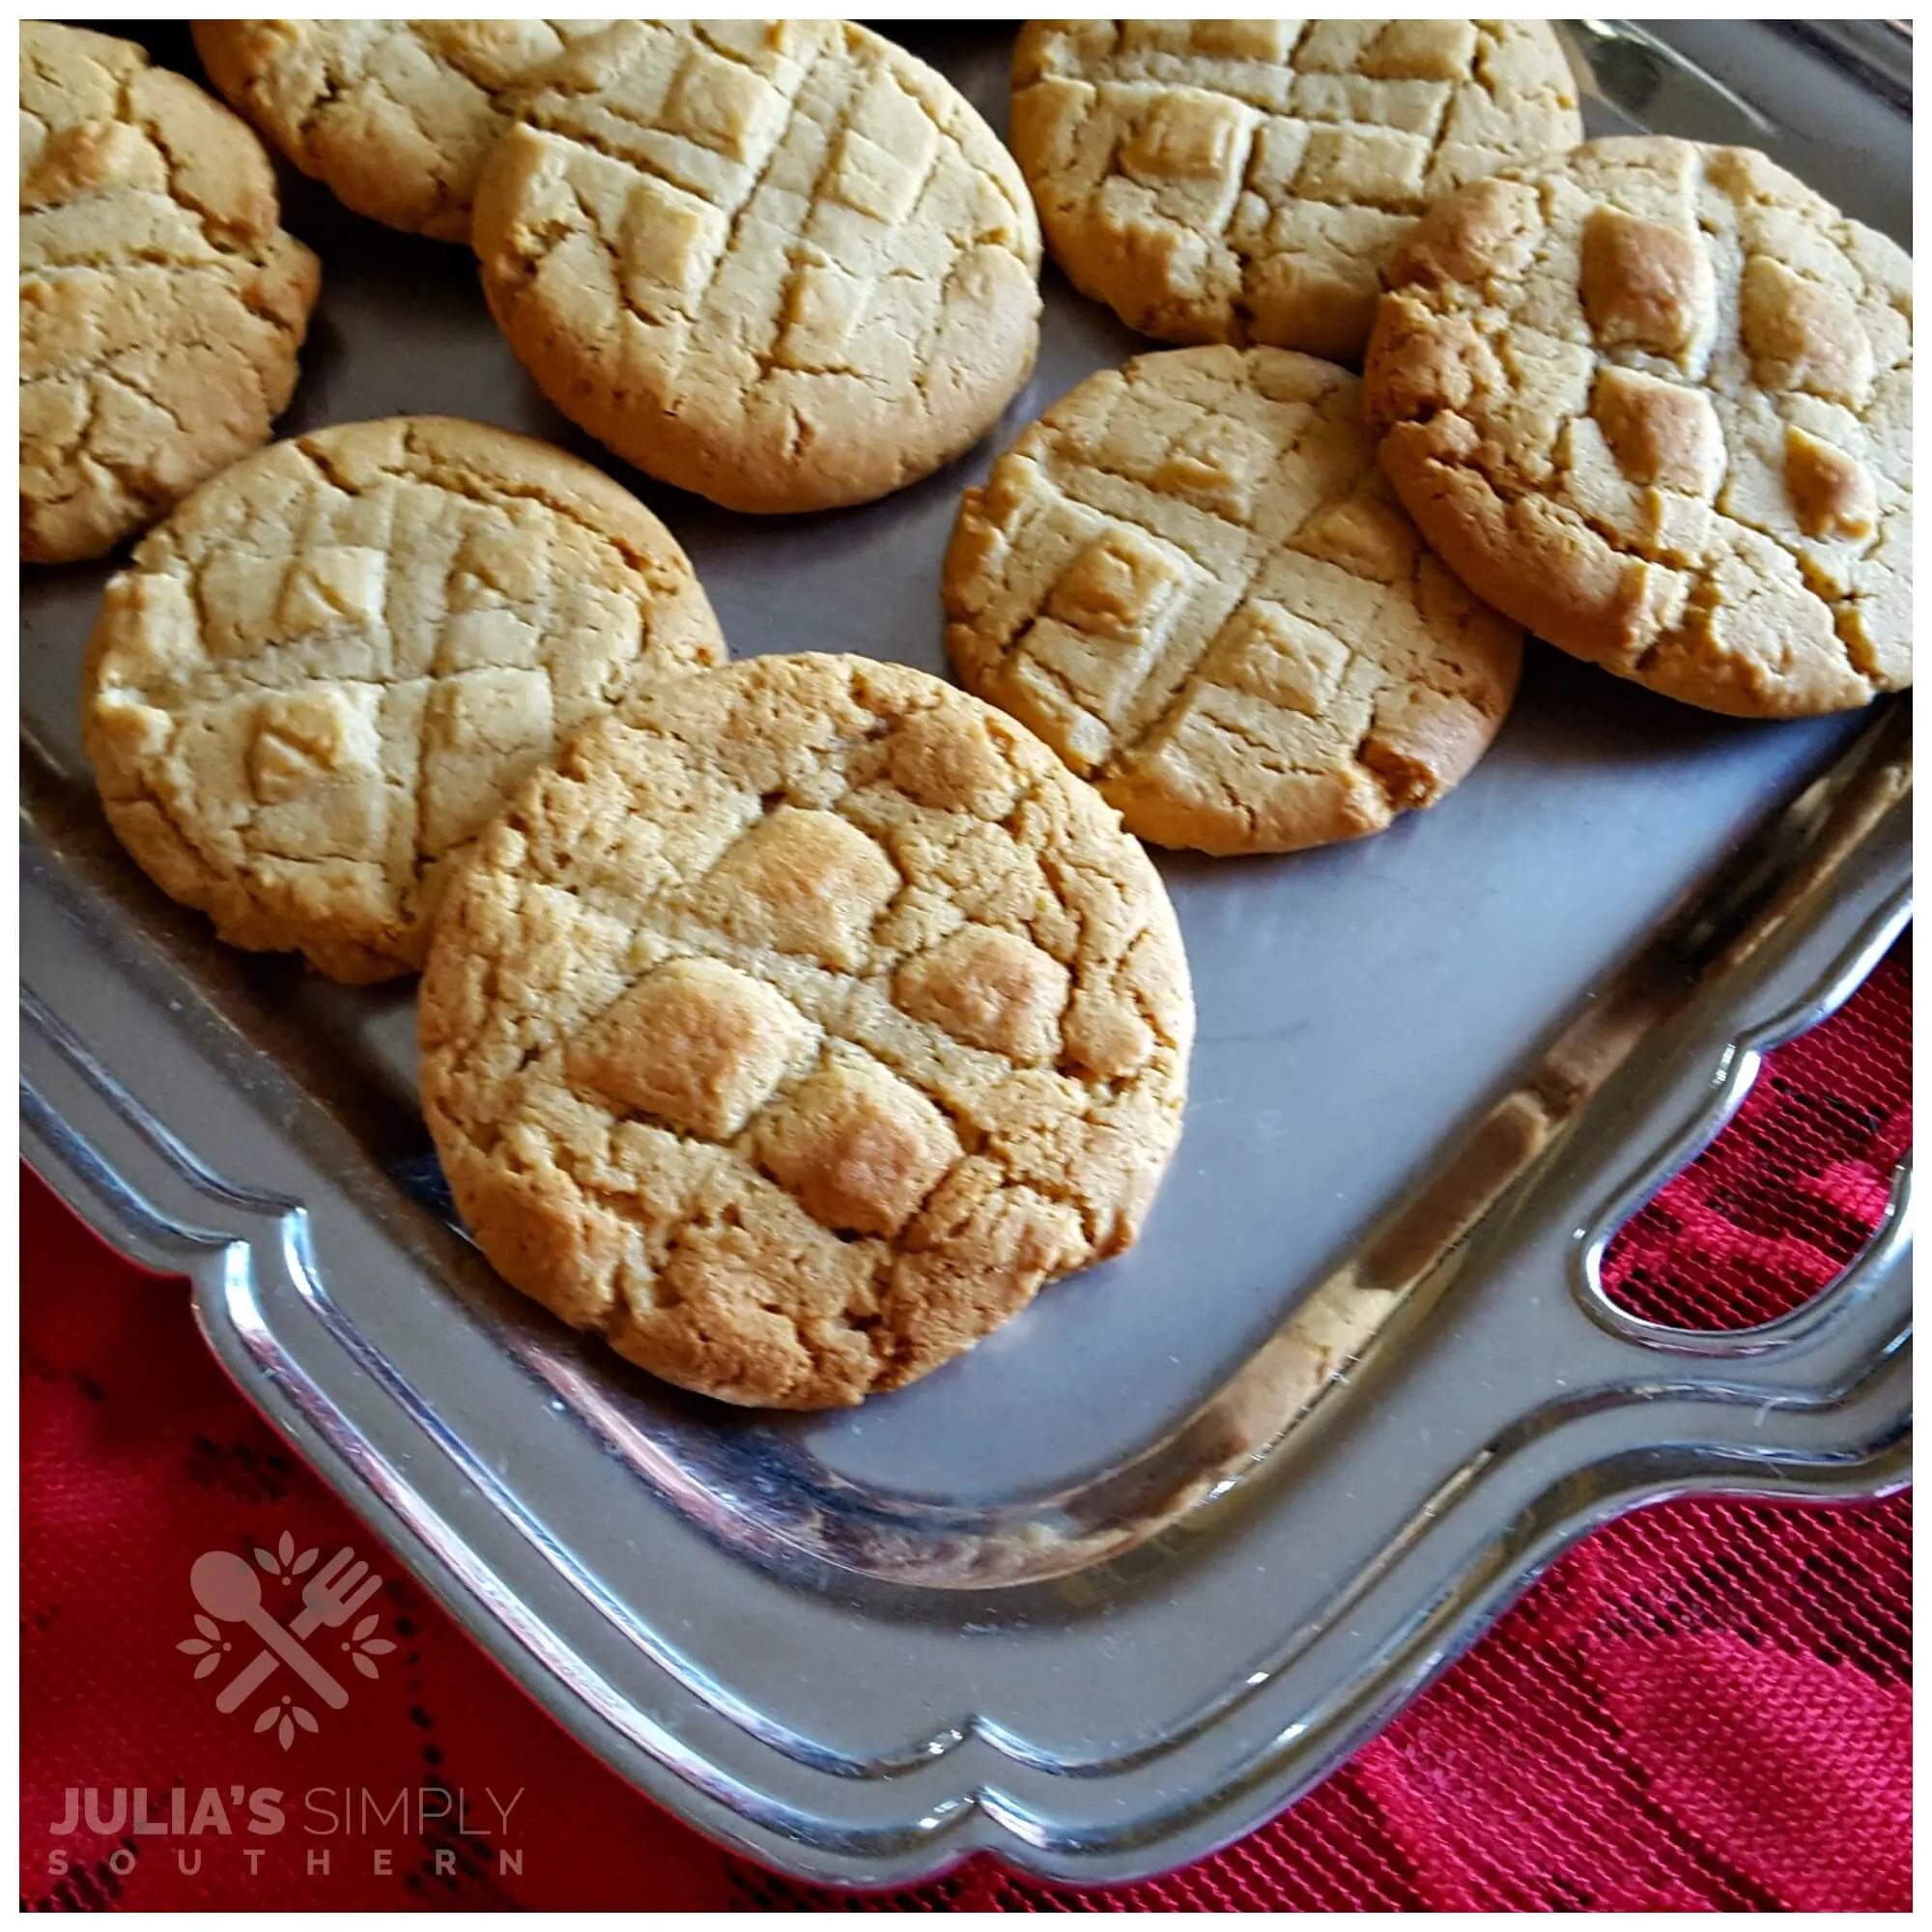 Fresh baked peanut butter cookies on a serving platter for the holidays